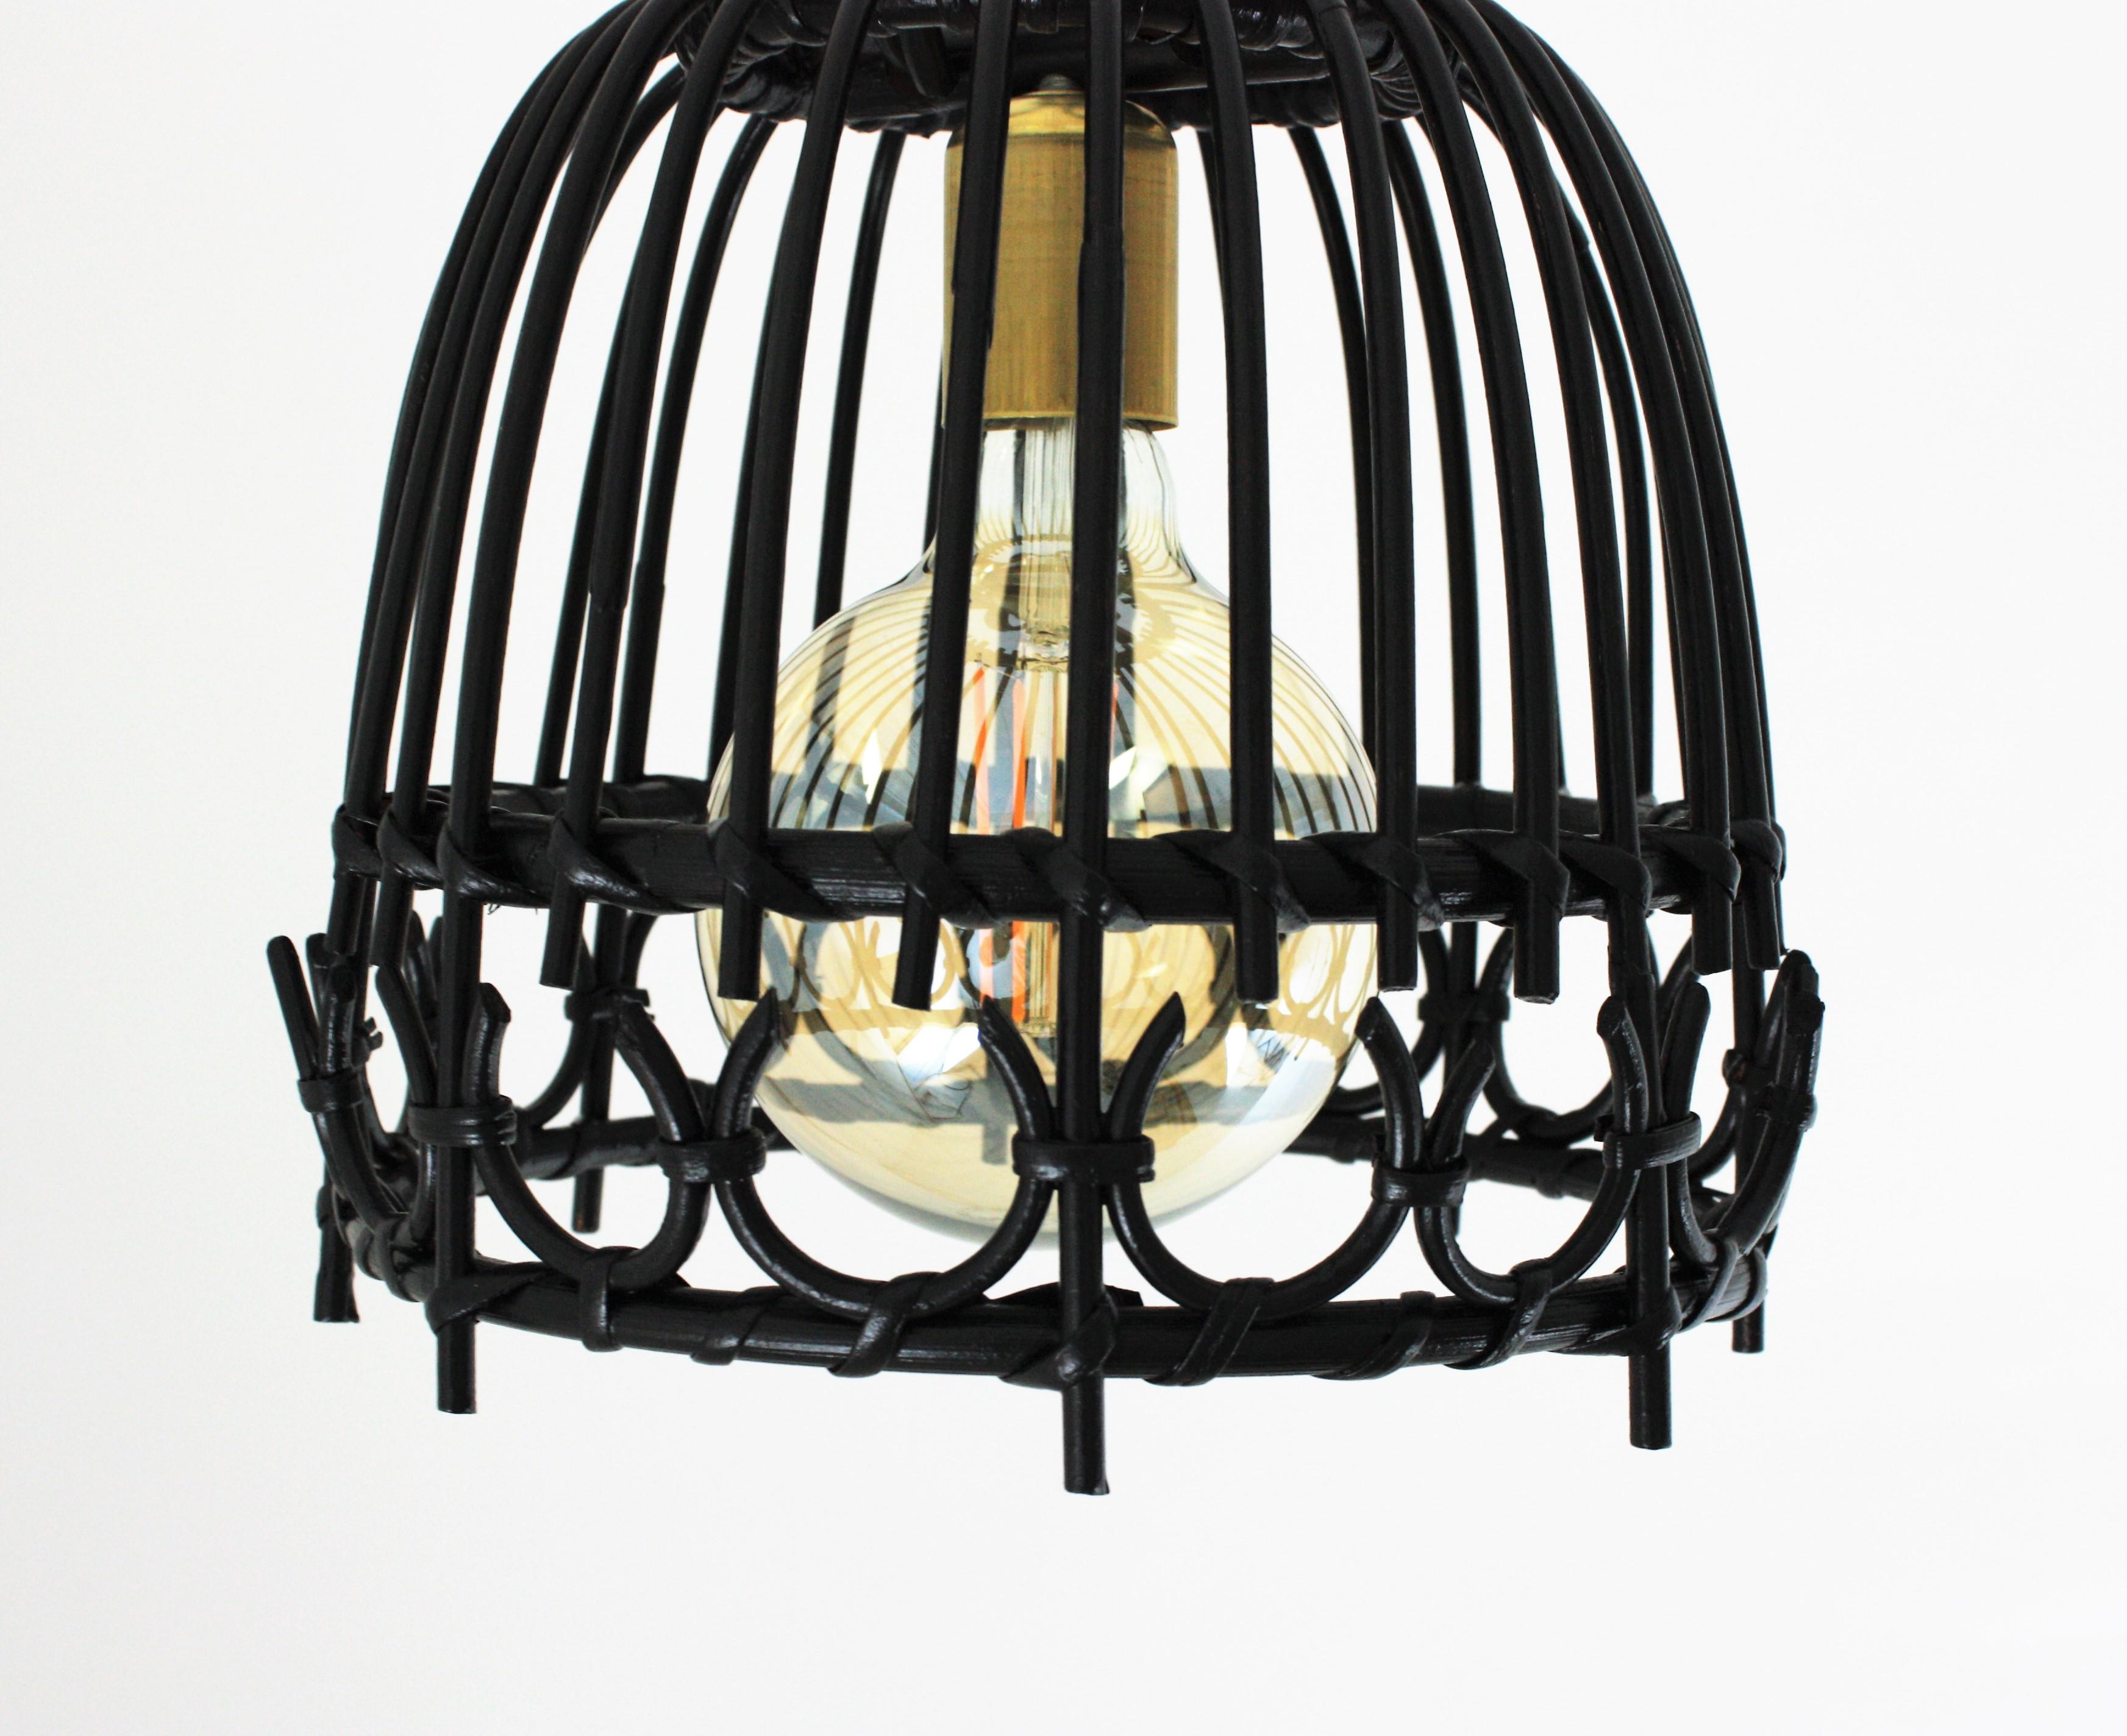 20th Century Rattan Bell Pendant or Hanging Light in Black Patina, Spain, 1960s For Sale